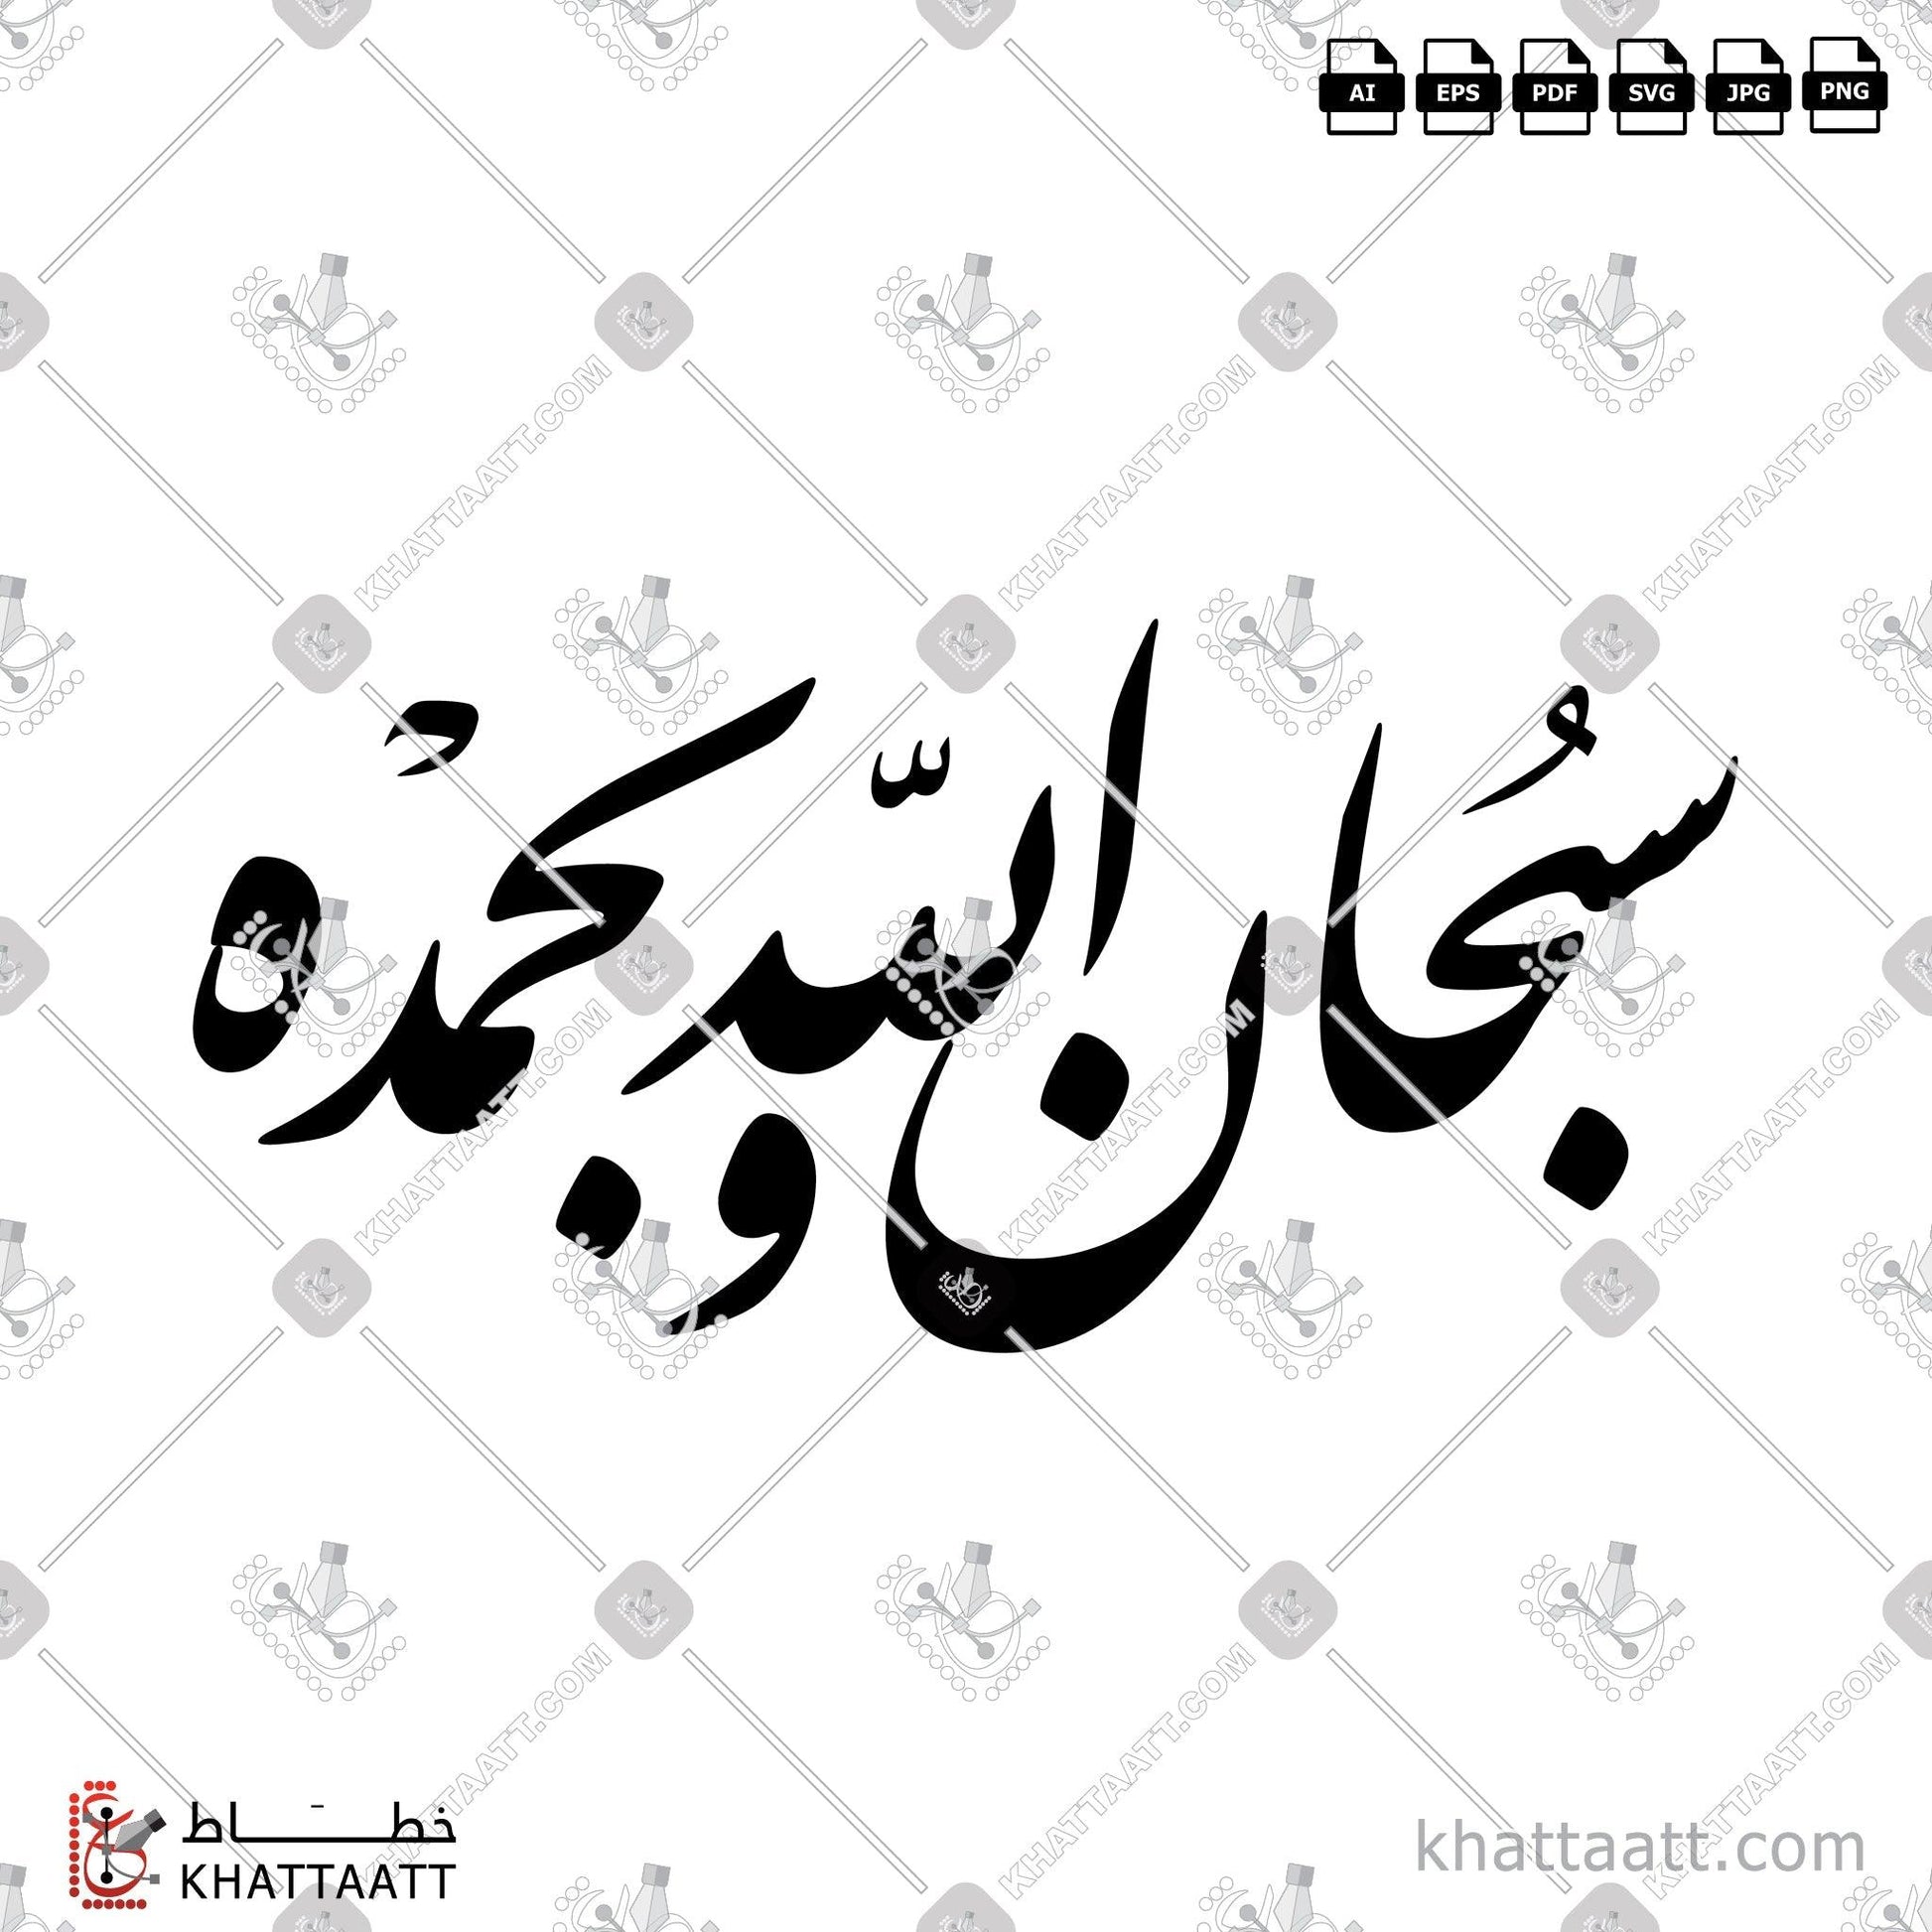 Download Arabic Calligraphy of سبحان الله وبحمده in Farsi - الخط الفارسي in vector and .png